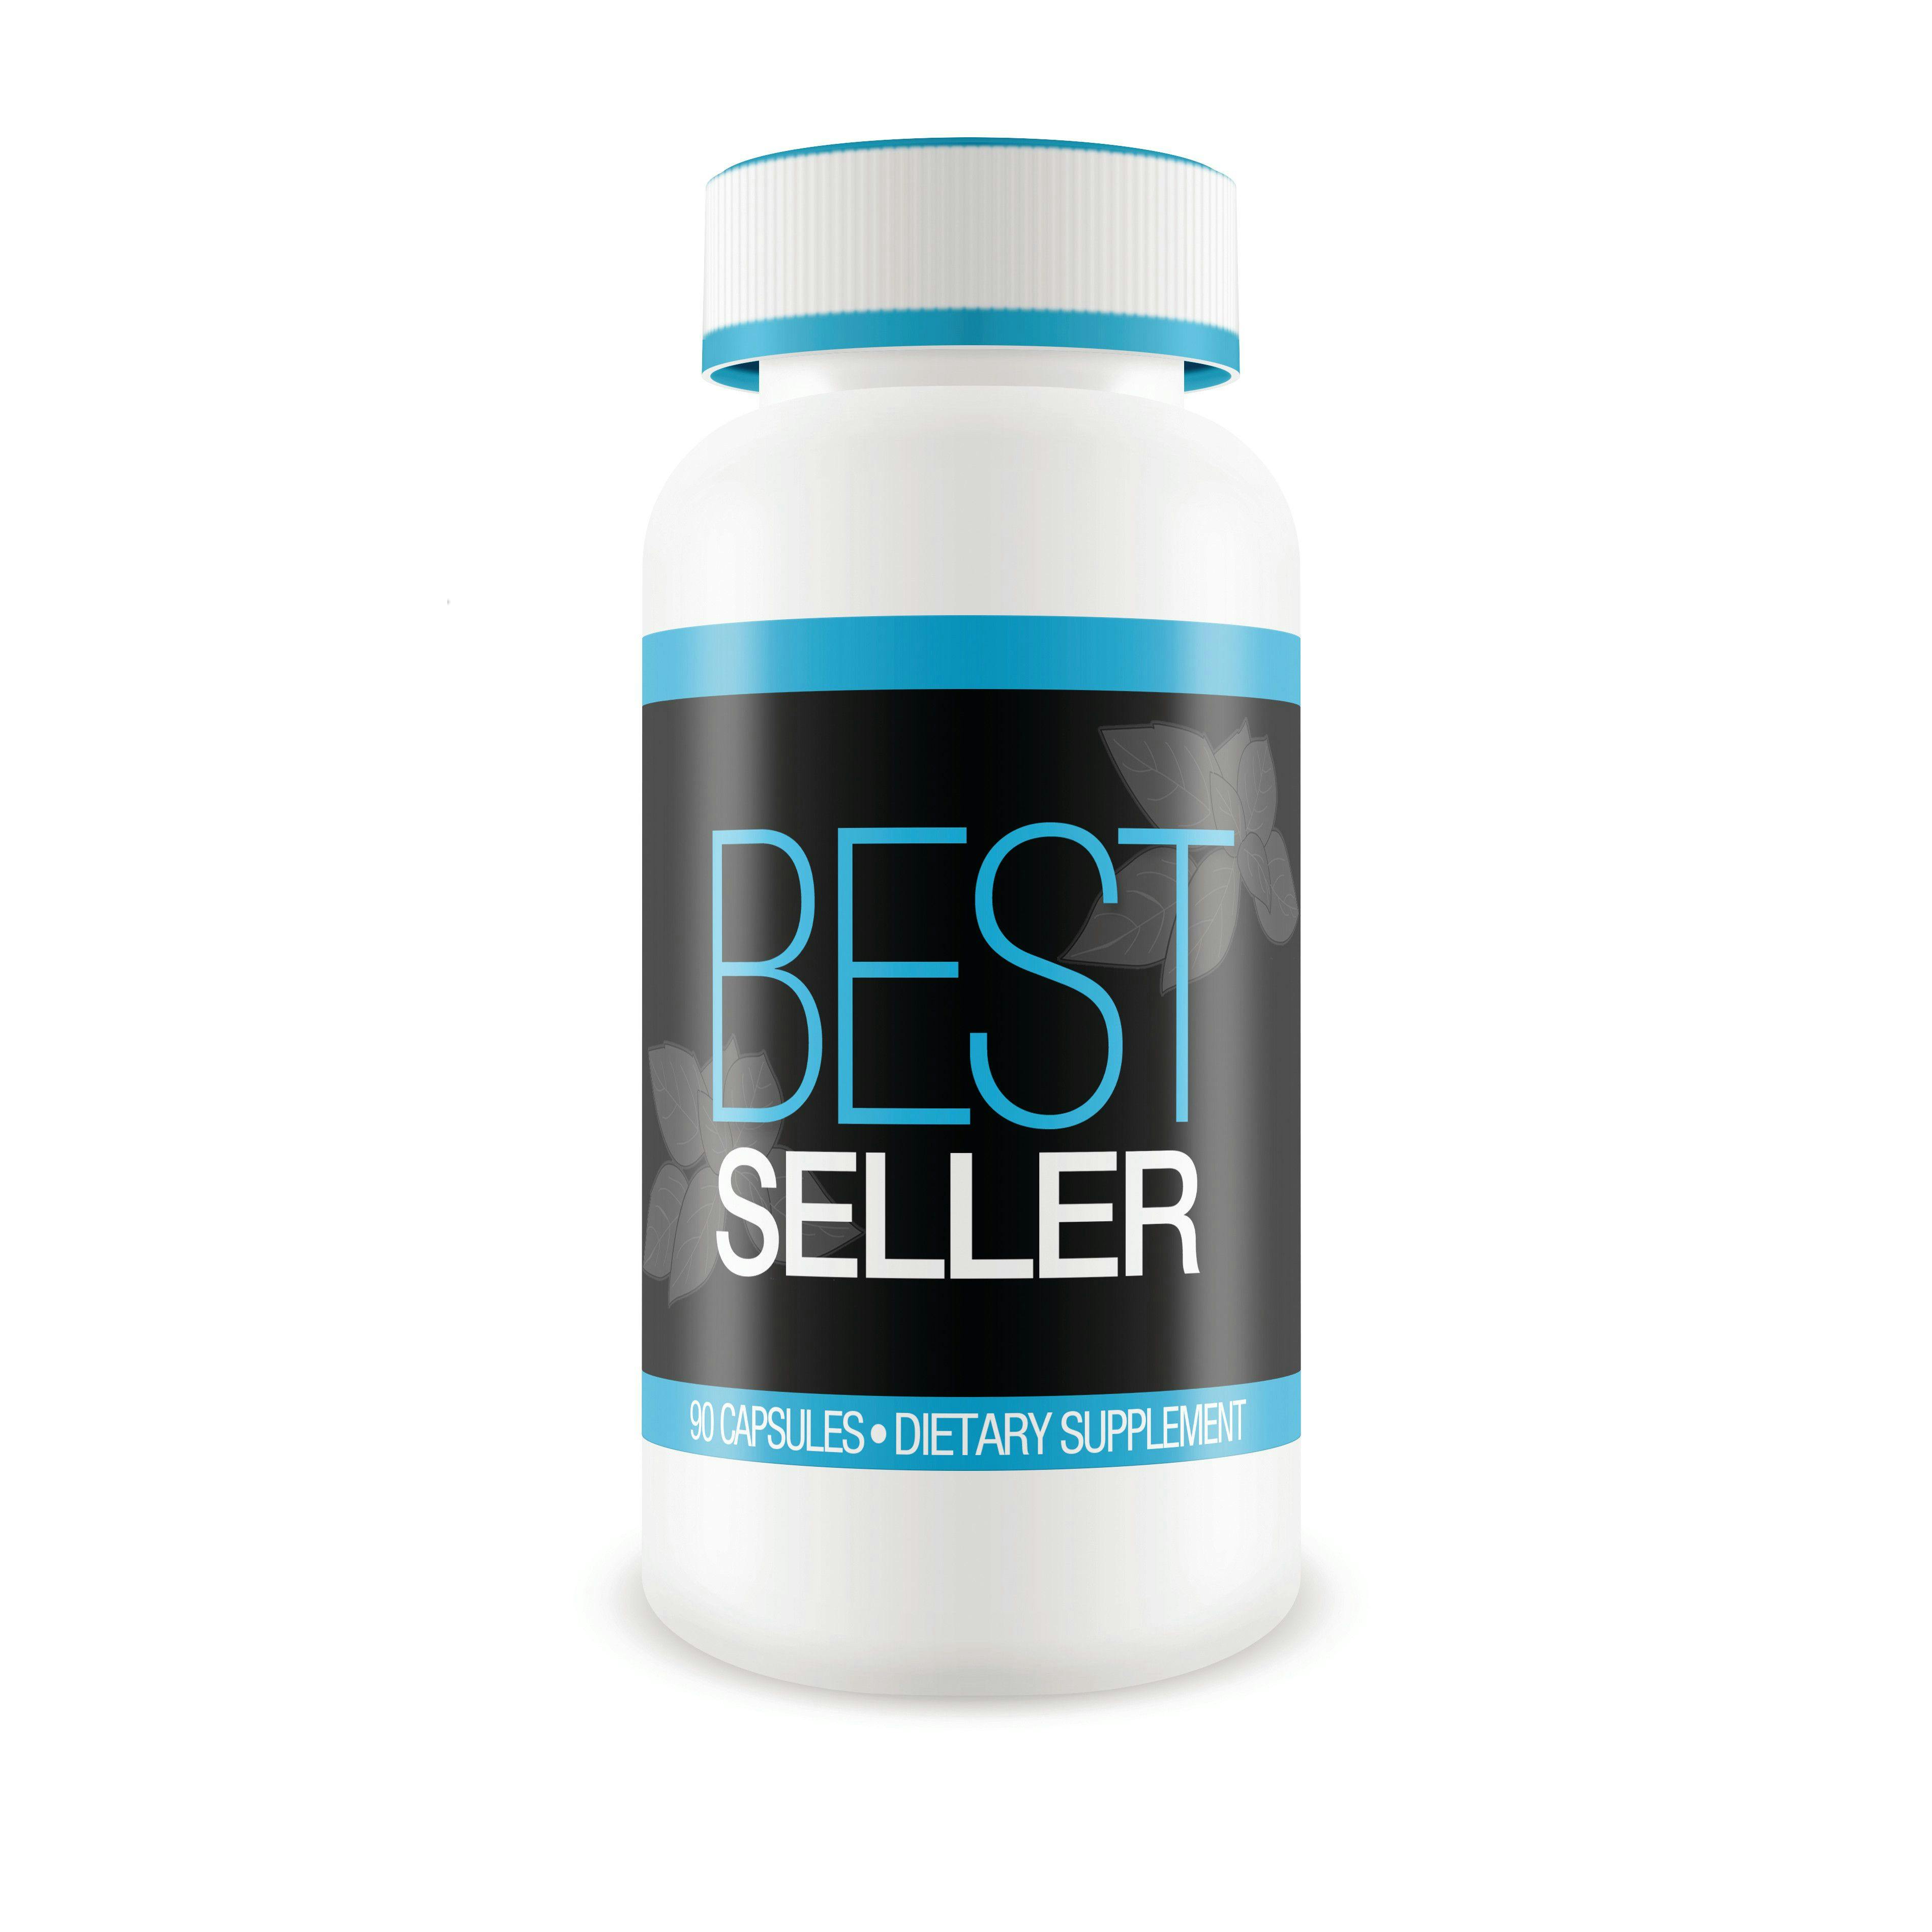 Best Seller: Telling a Brand's Story though Dietary Supplement Package Design